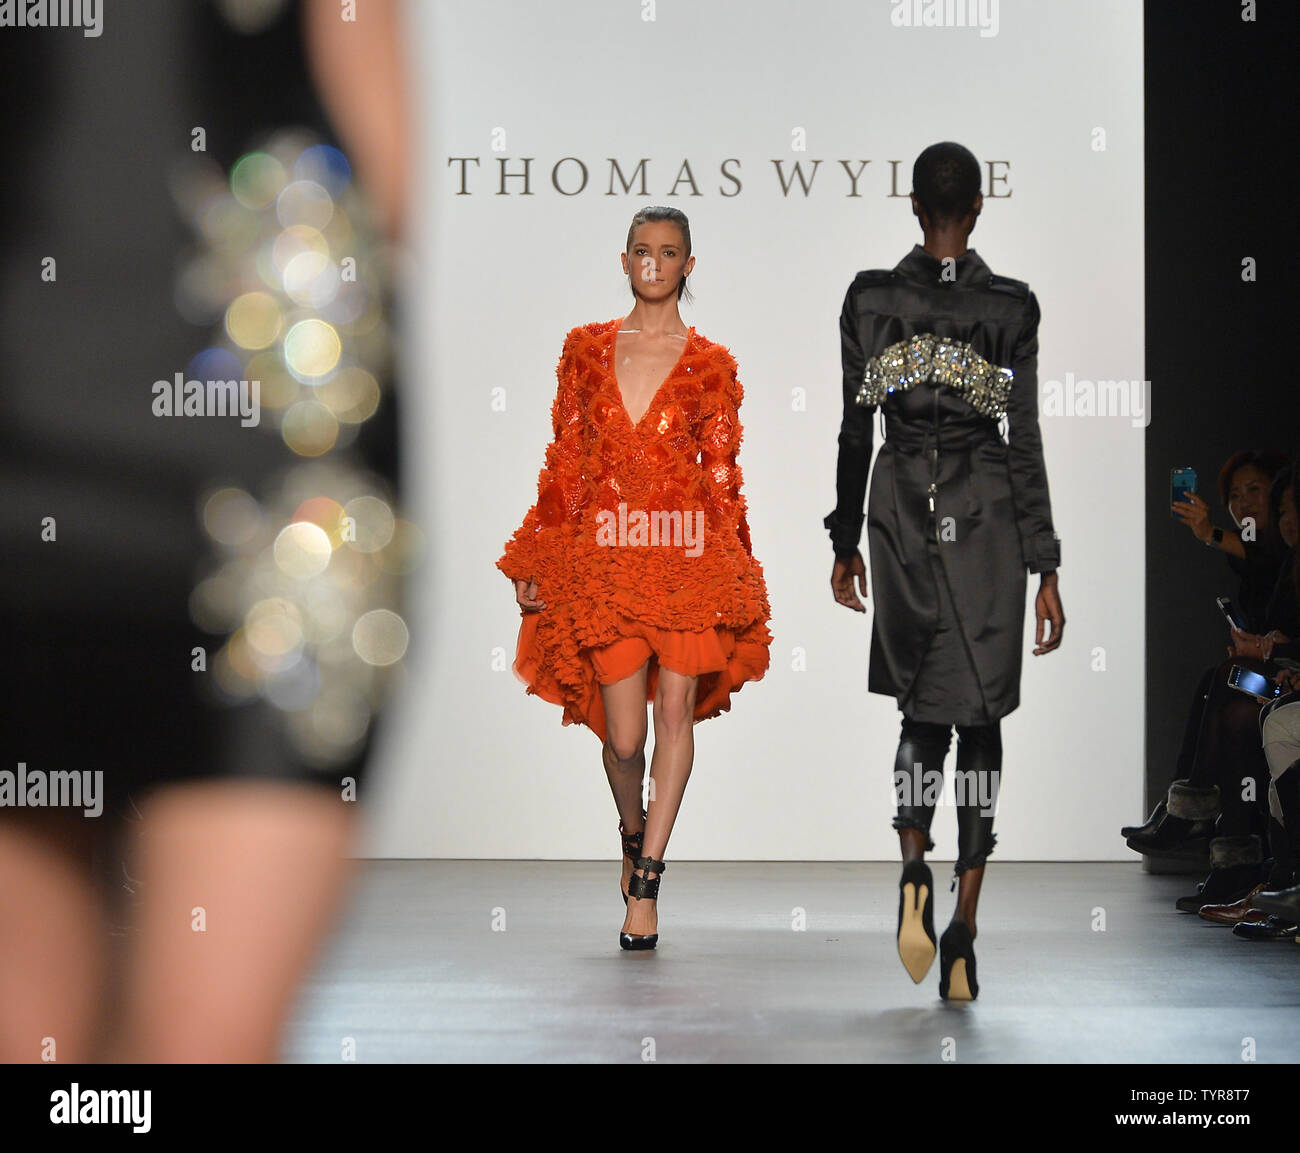 Thomas wylde hi-res stock photography and images - Alamy